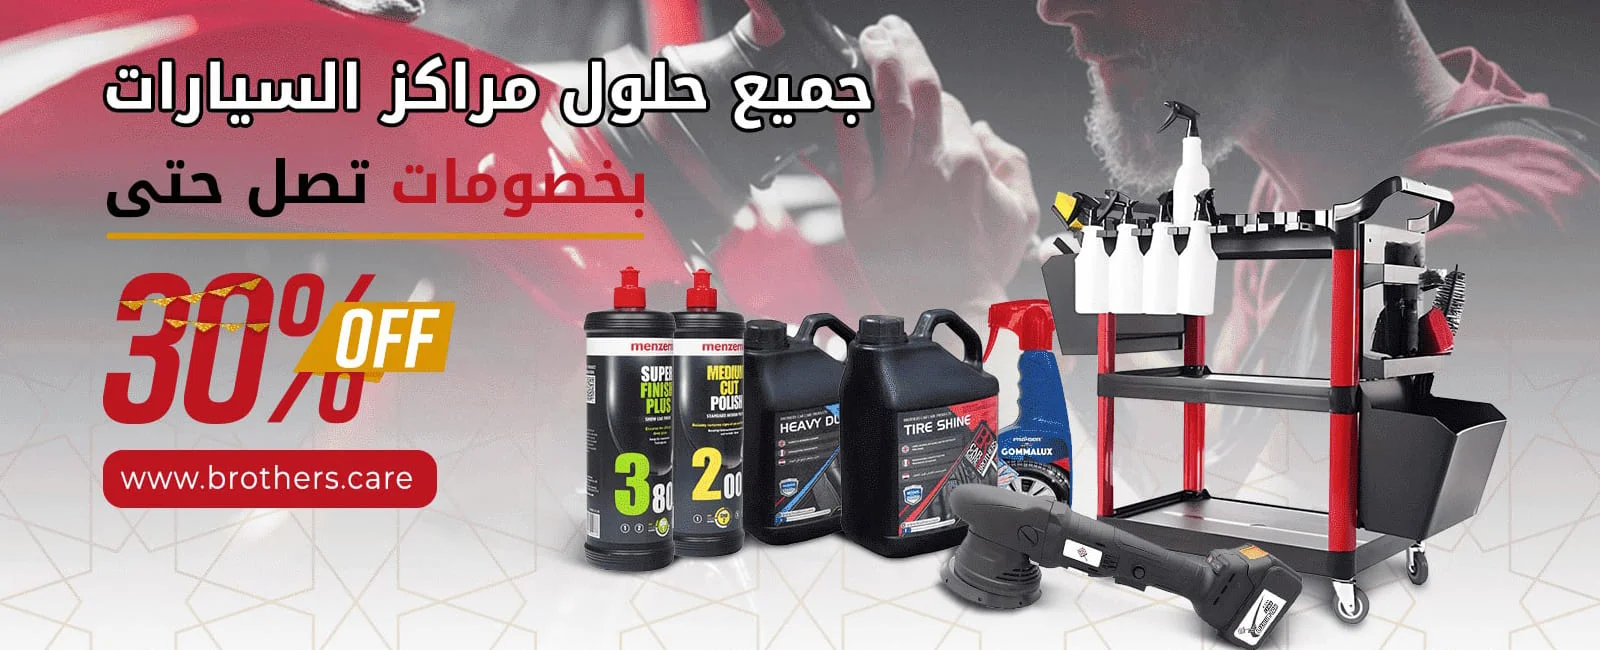 Brothers.care-All-the-Car-Care-Solutions-in-One-Website-in-Egypt-_1_